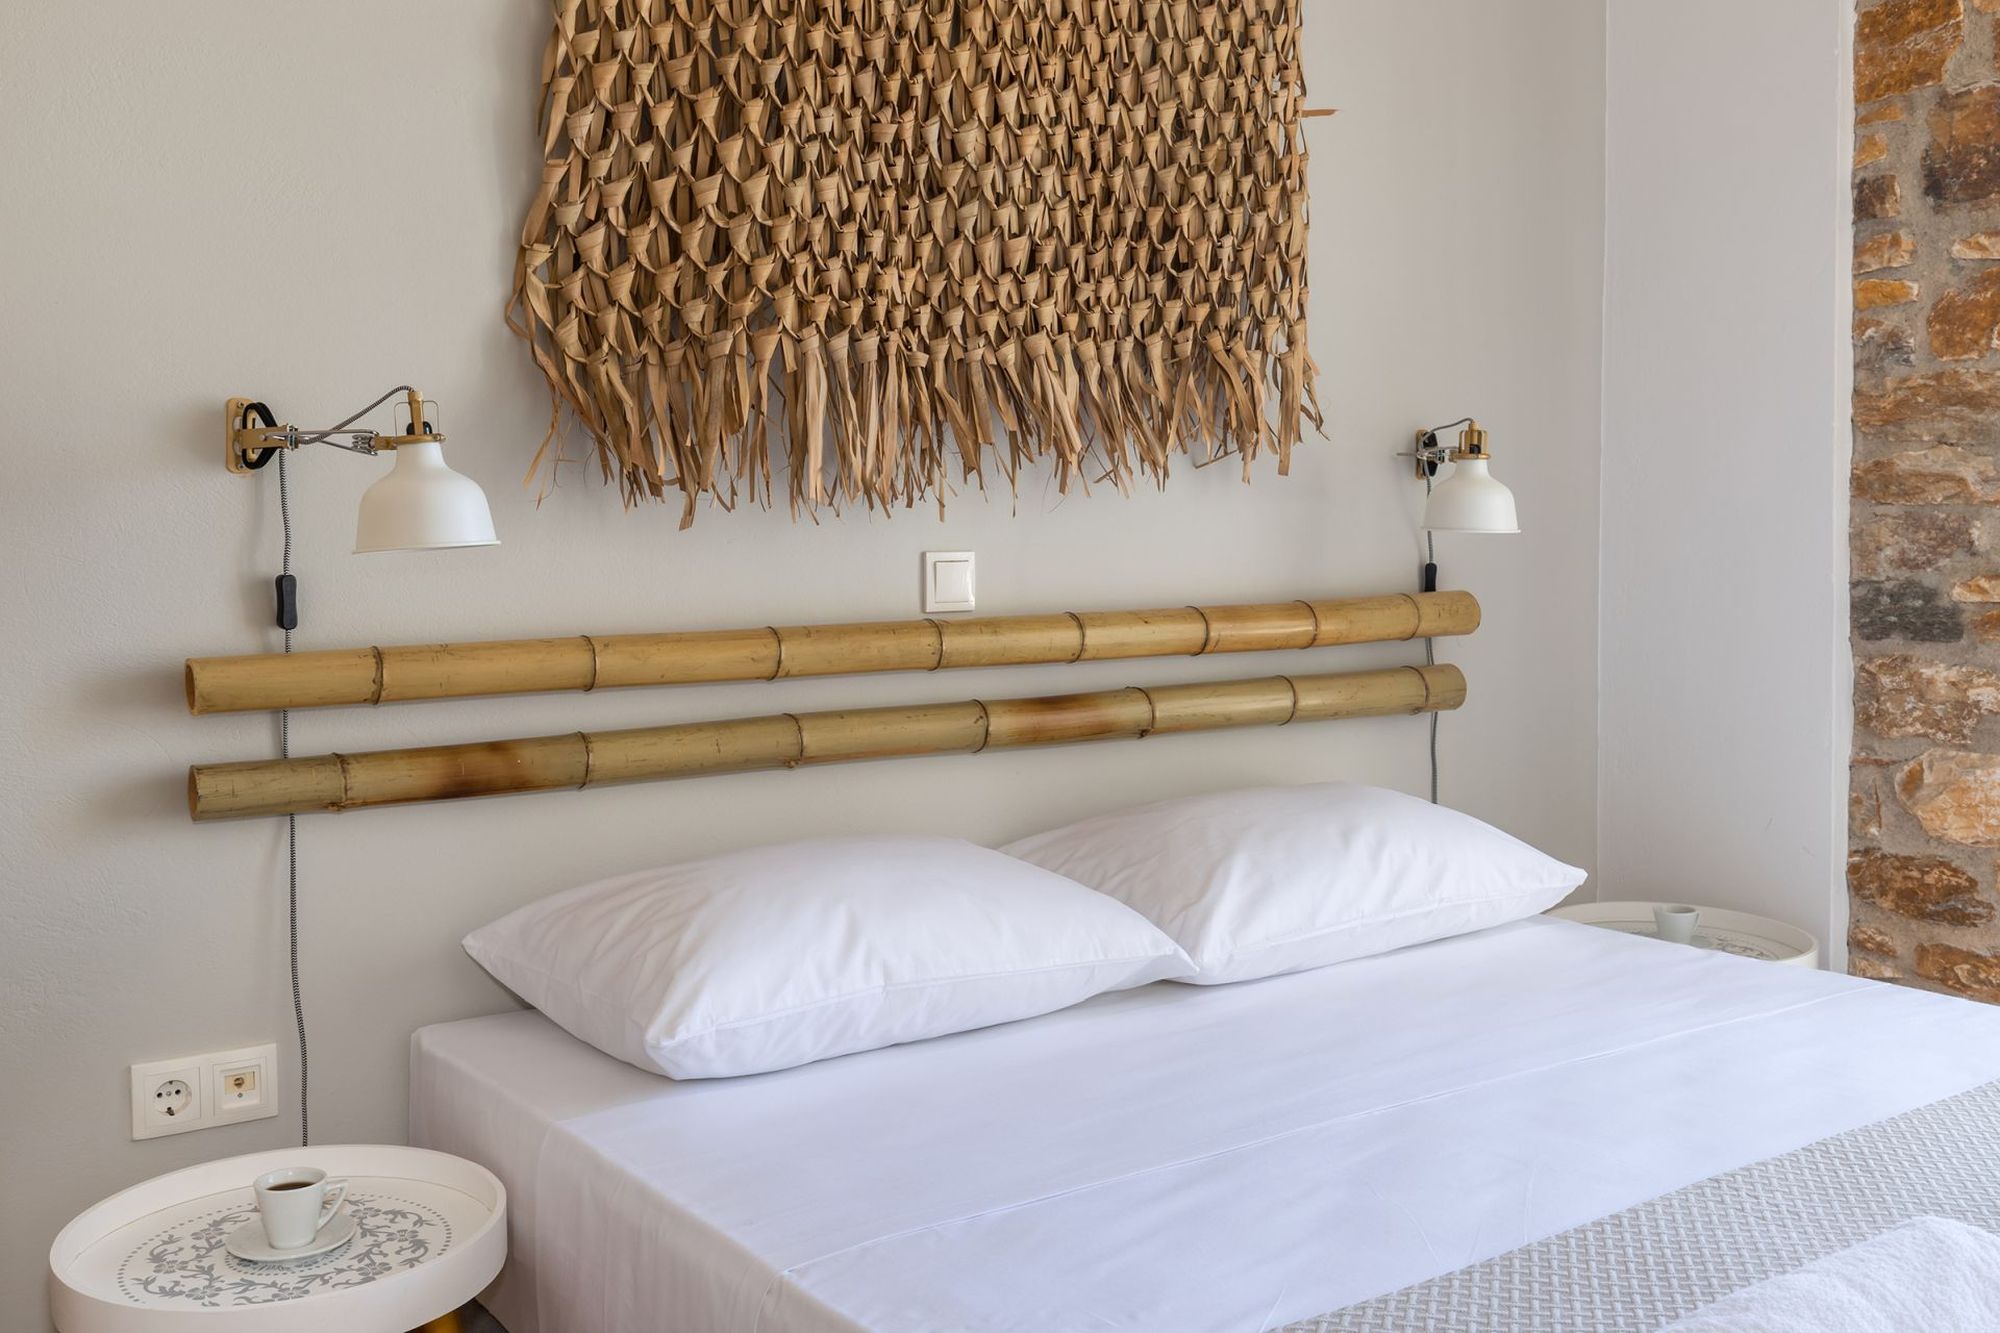 A double bed with white sheets in a stone-built bedroom, two white bedside tables, two gold-white wall lights and the wall over the bed is decorated with bamboo masts and a wicker decorative element. 